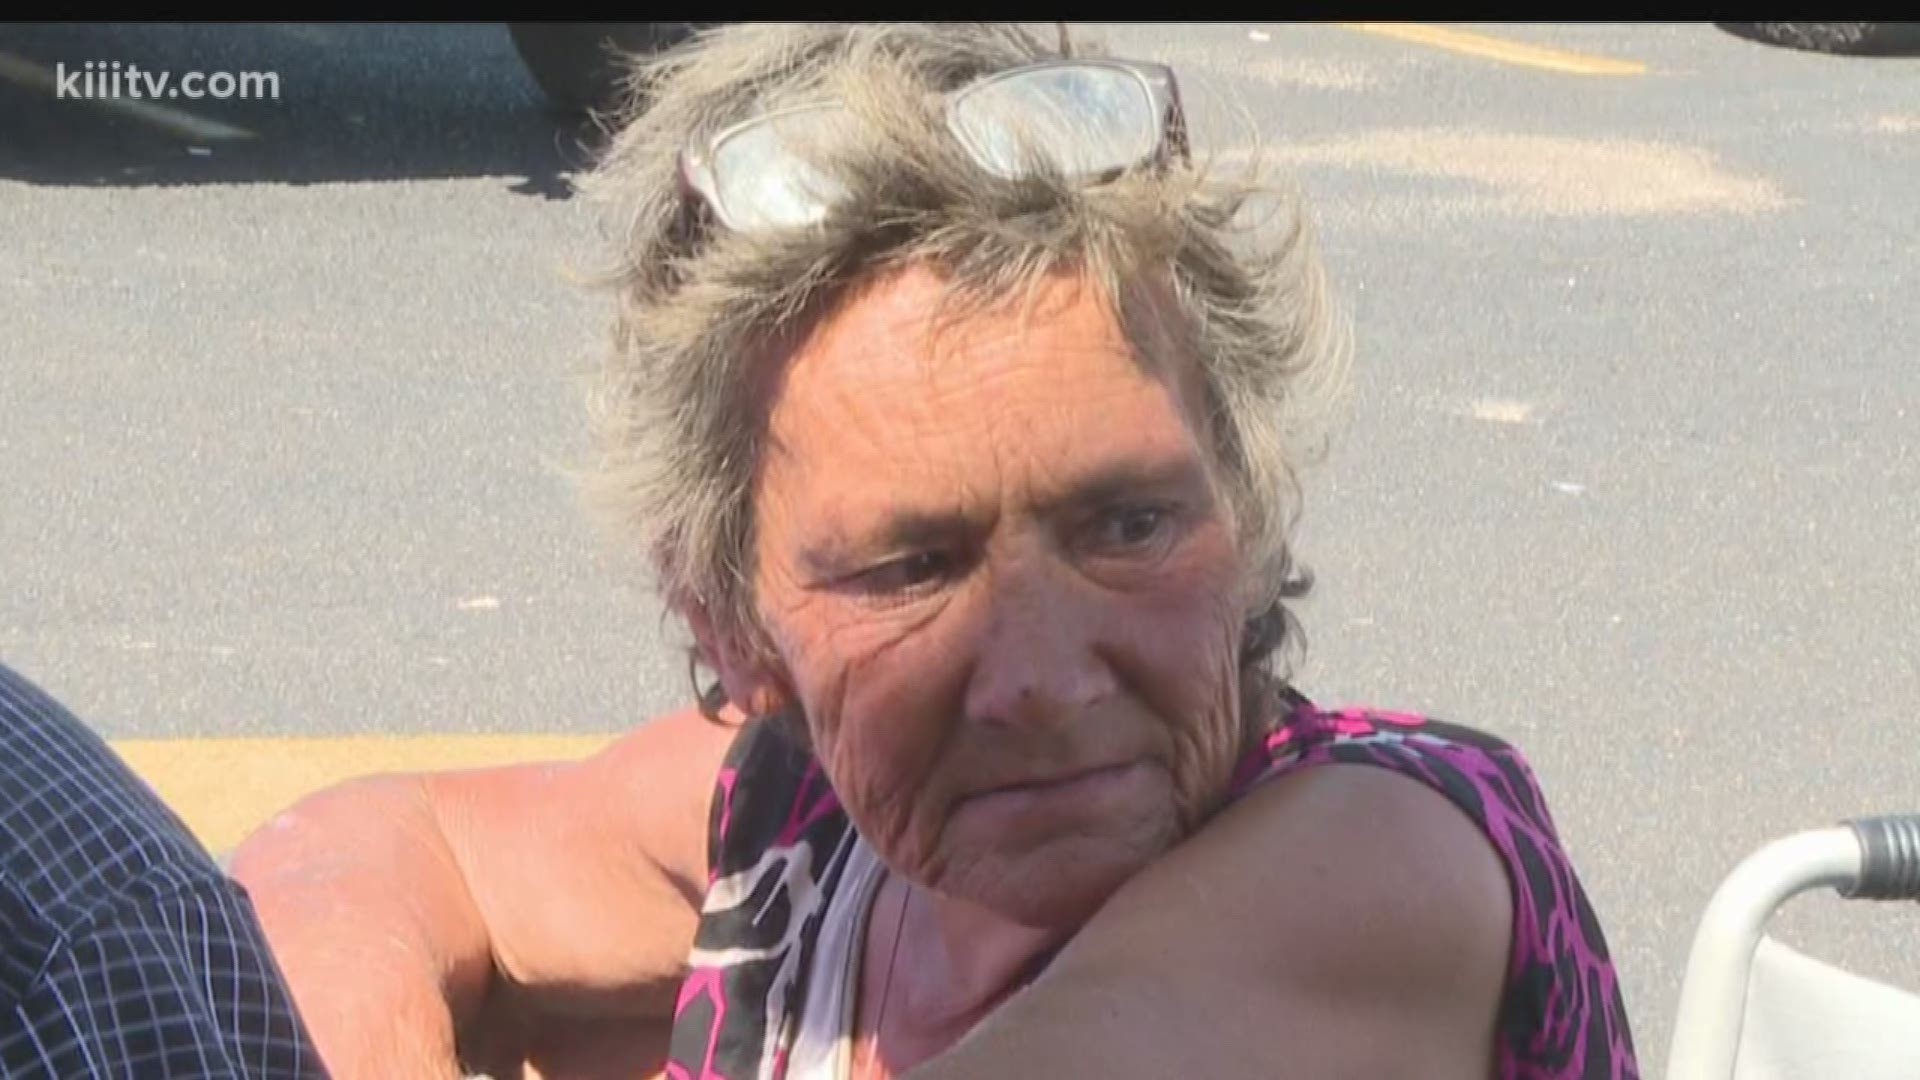 A 52-year-old homeless woman in Aransas Pass has been labeled a habitual nuisance by law enforcement after being barred from many area businesses.